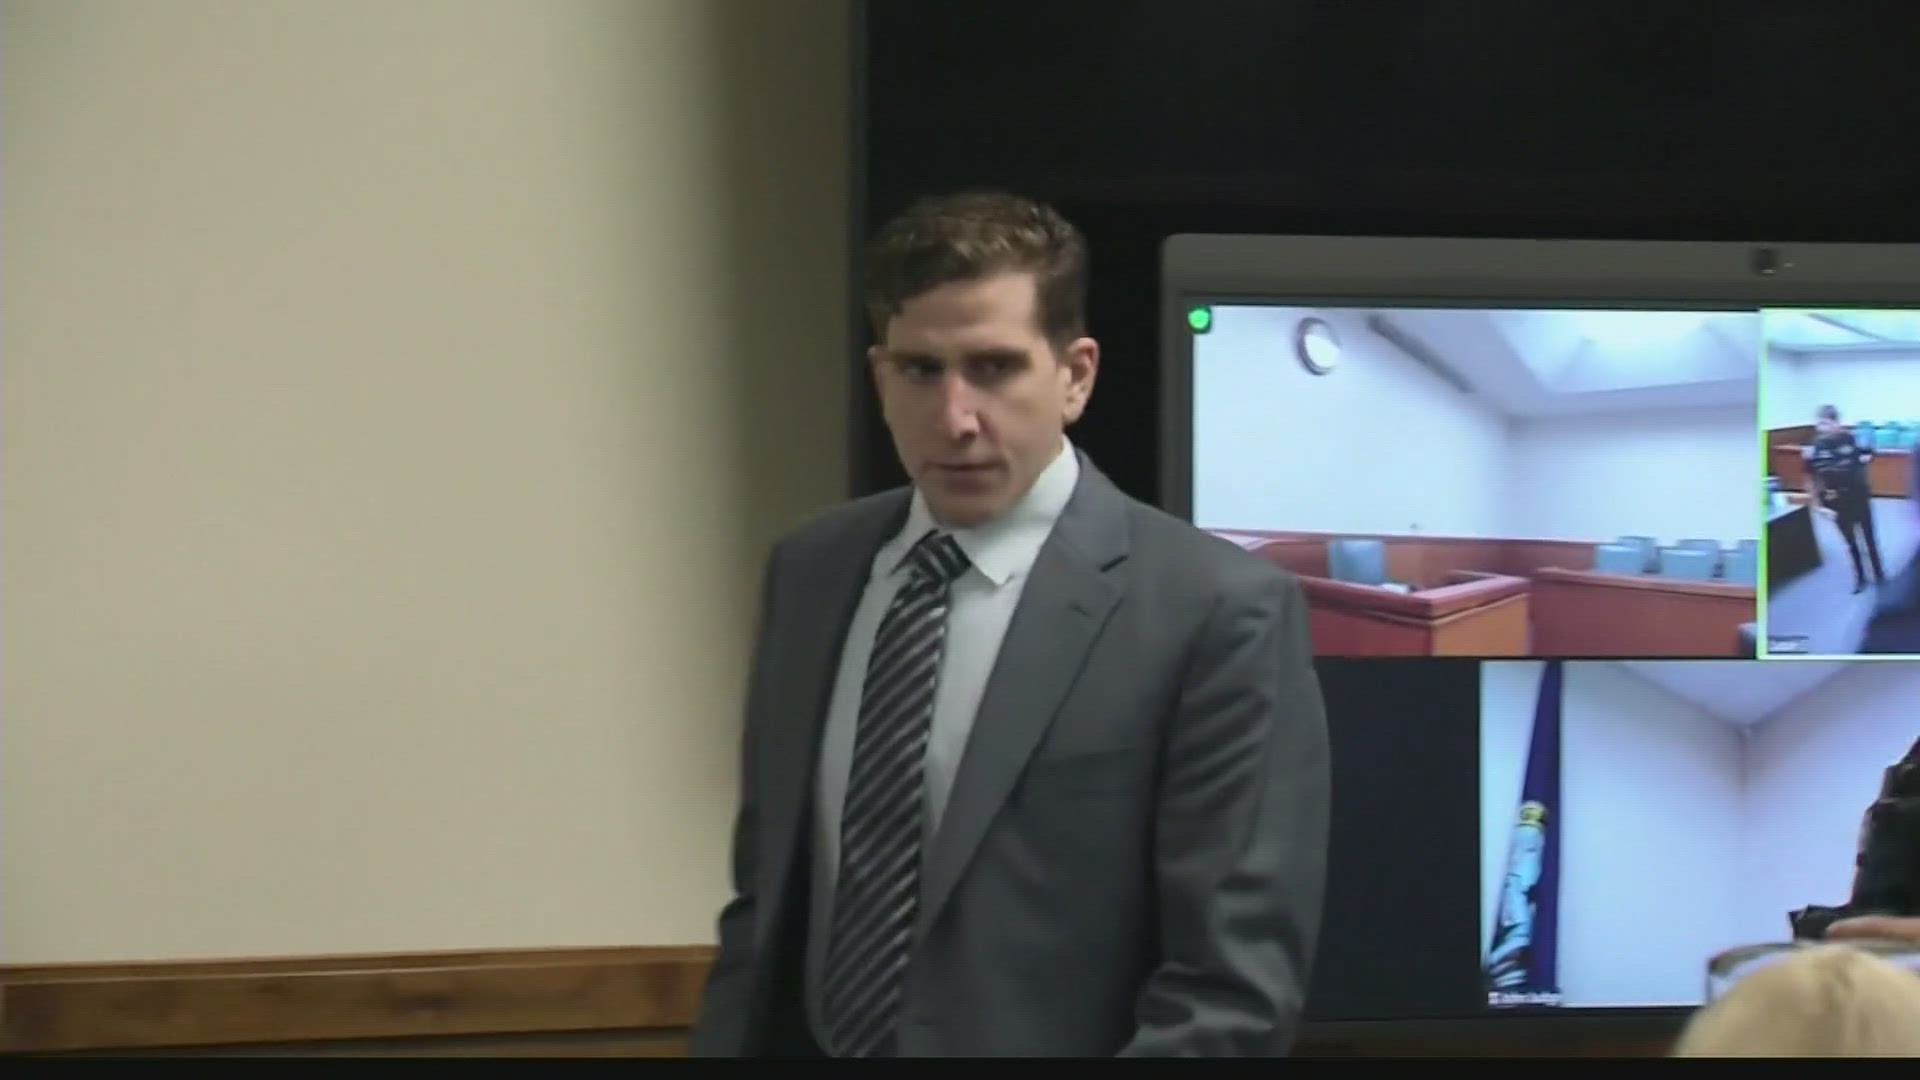 Bryan Kohlberger's legal team is trying to prevent cameras in the court for the duration of his murder trial.